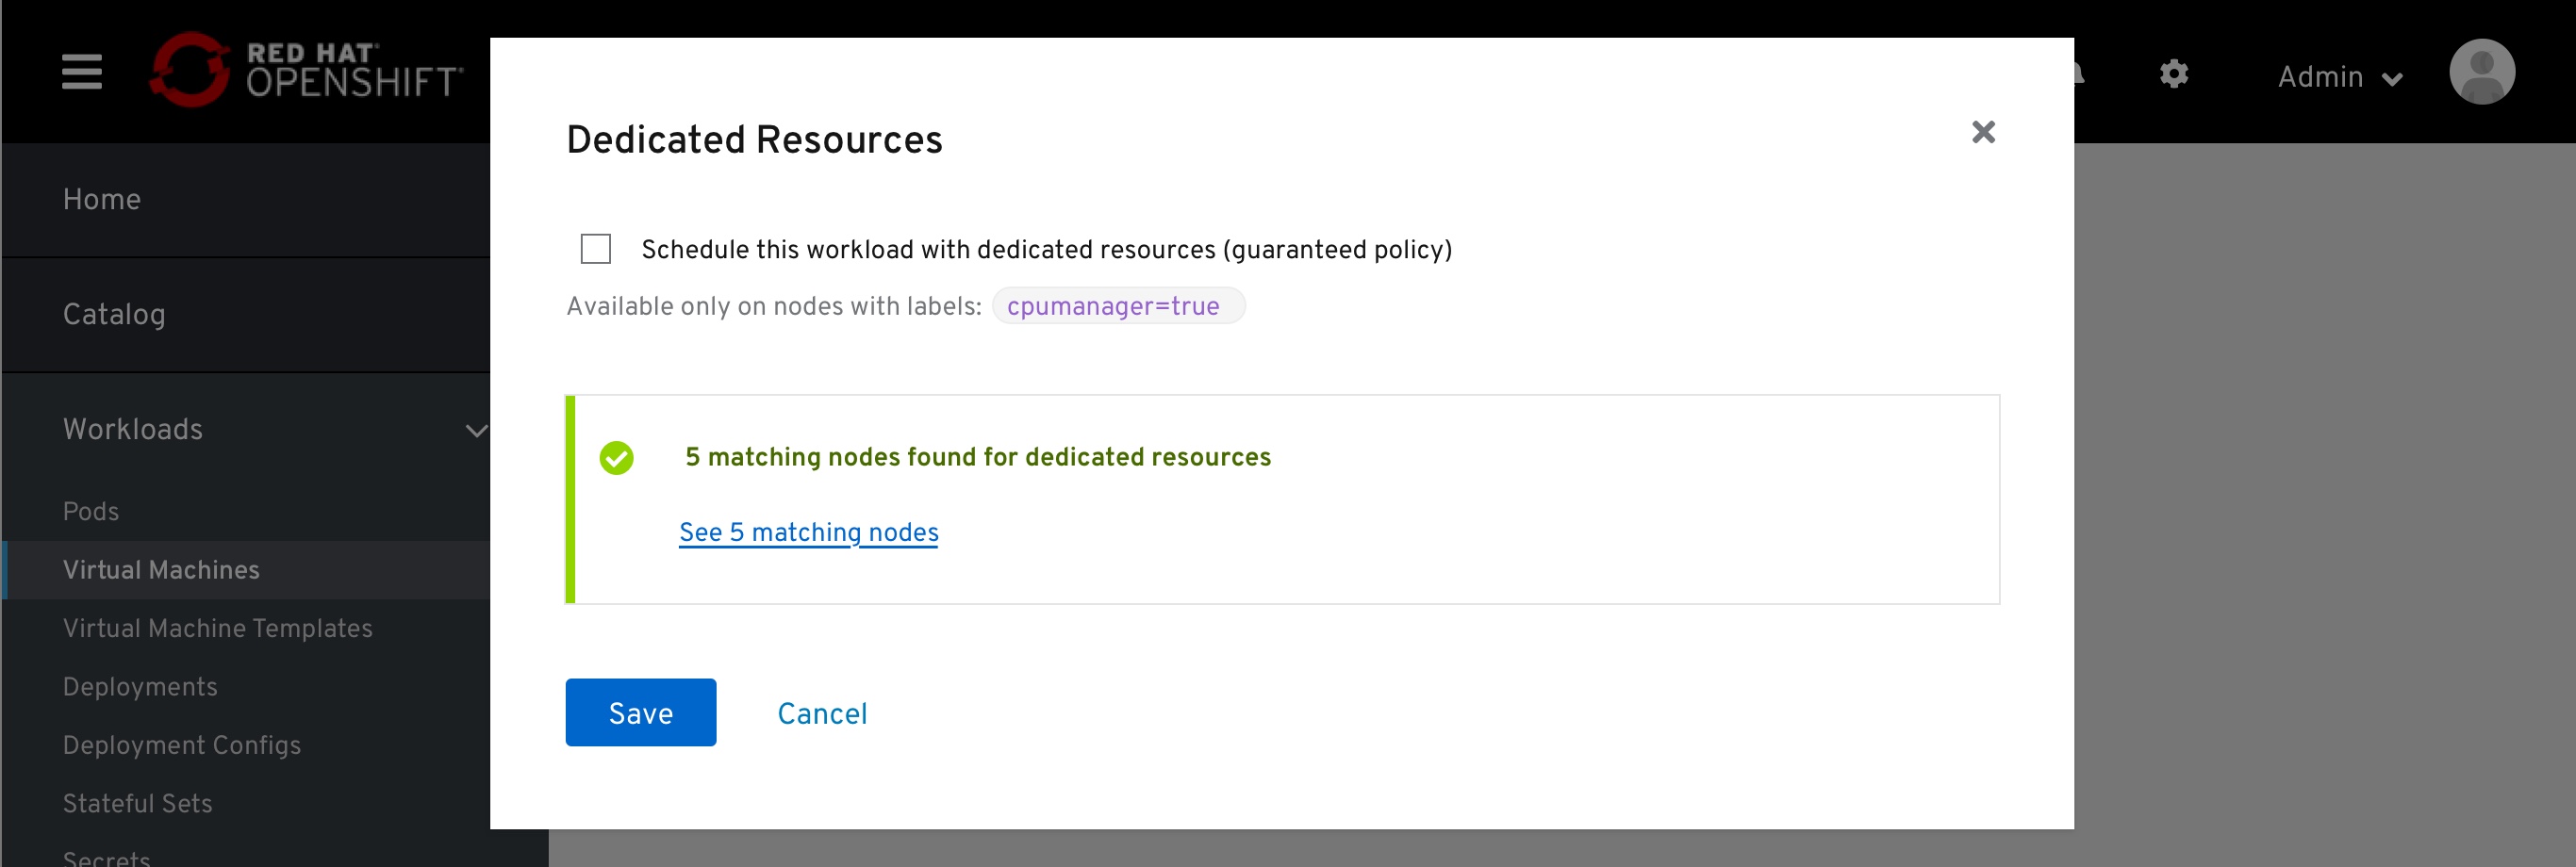 Dedicated resources modal